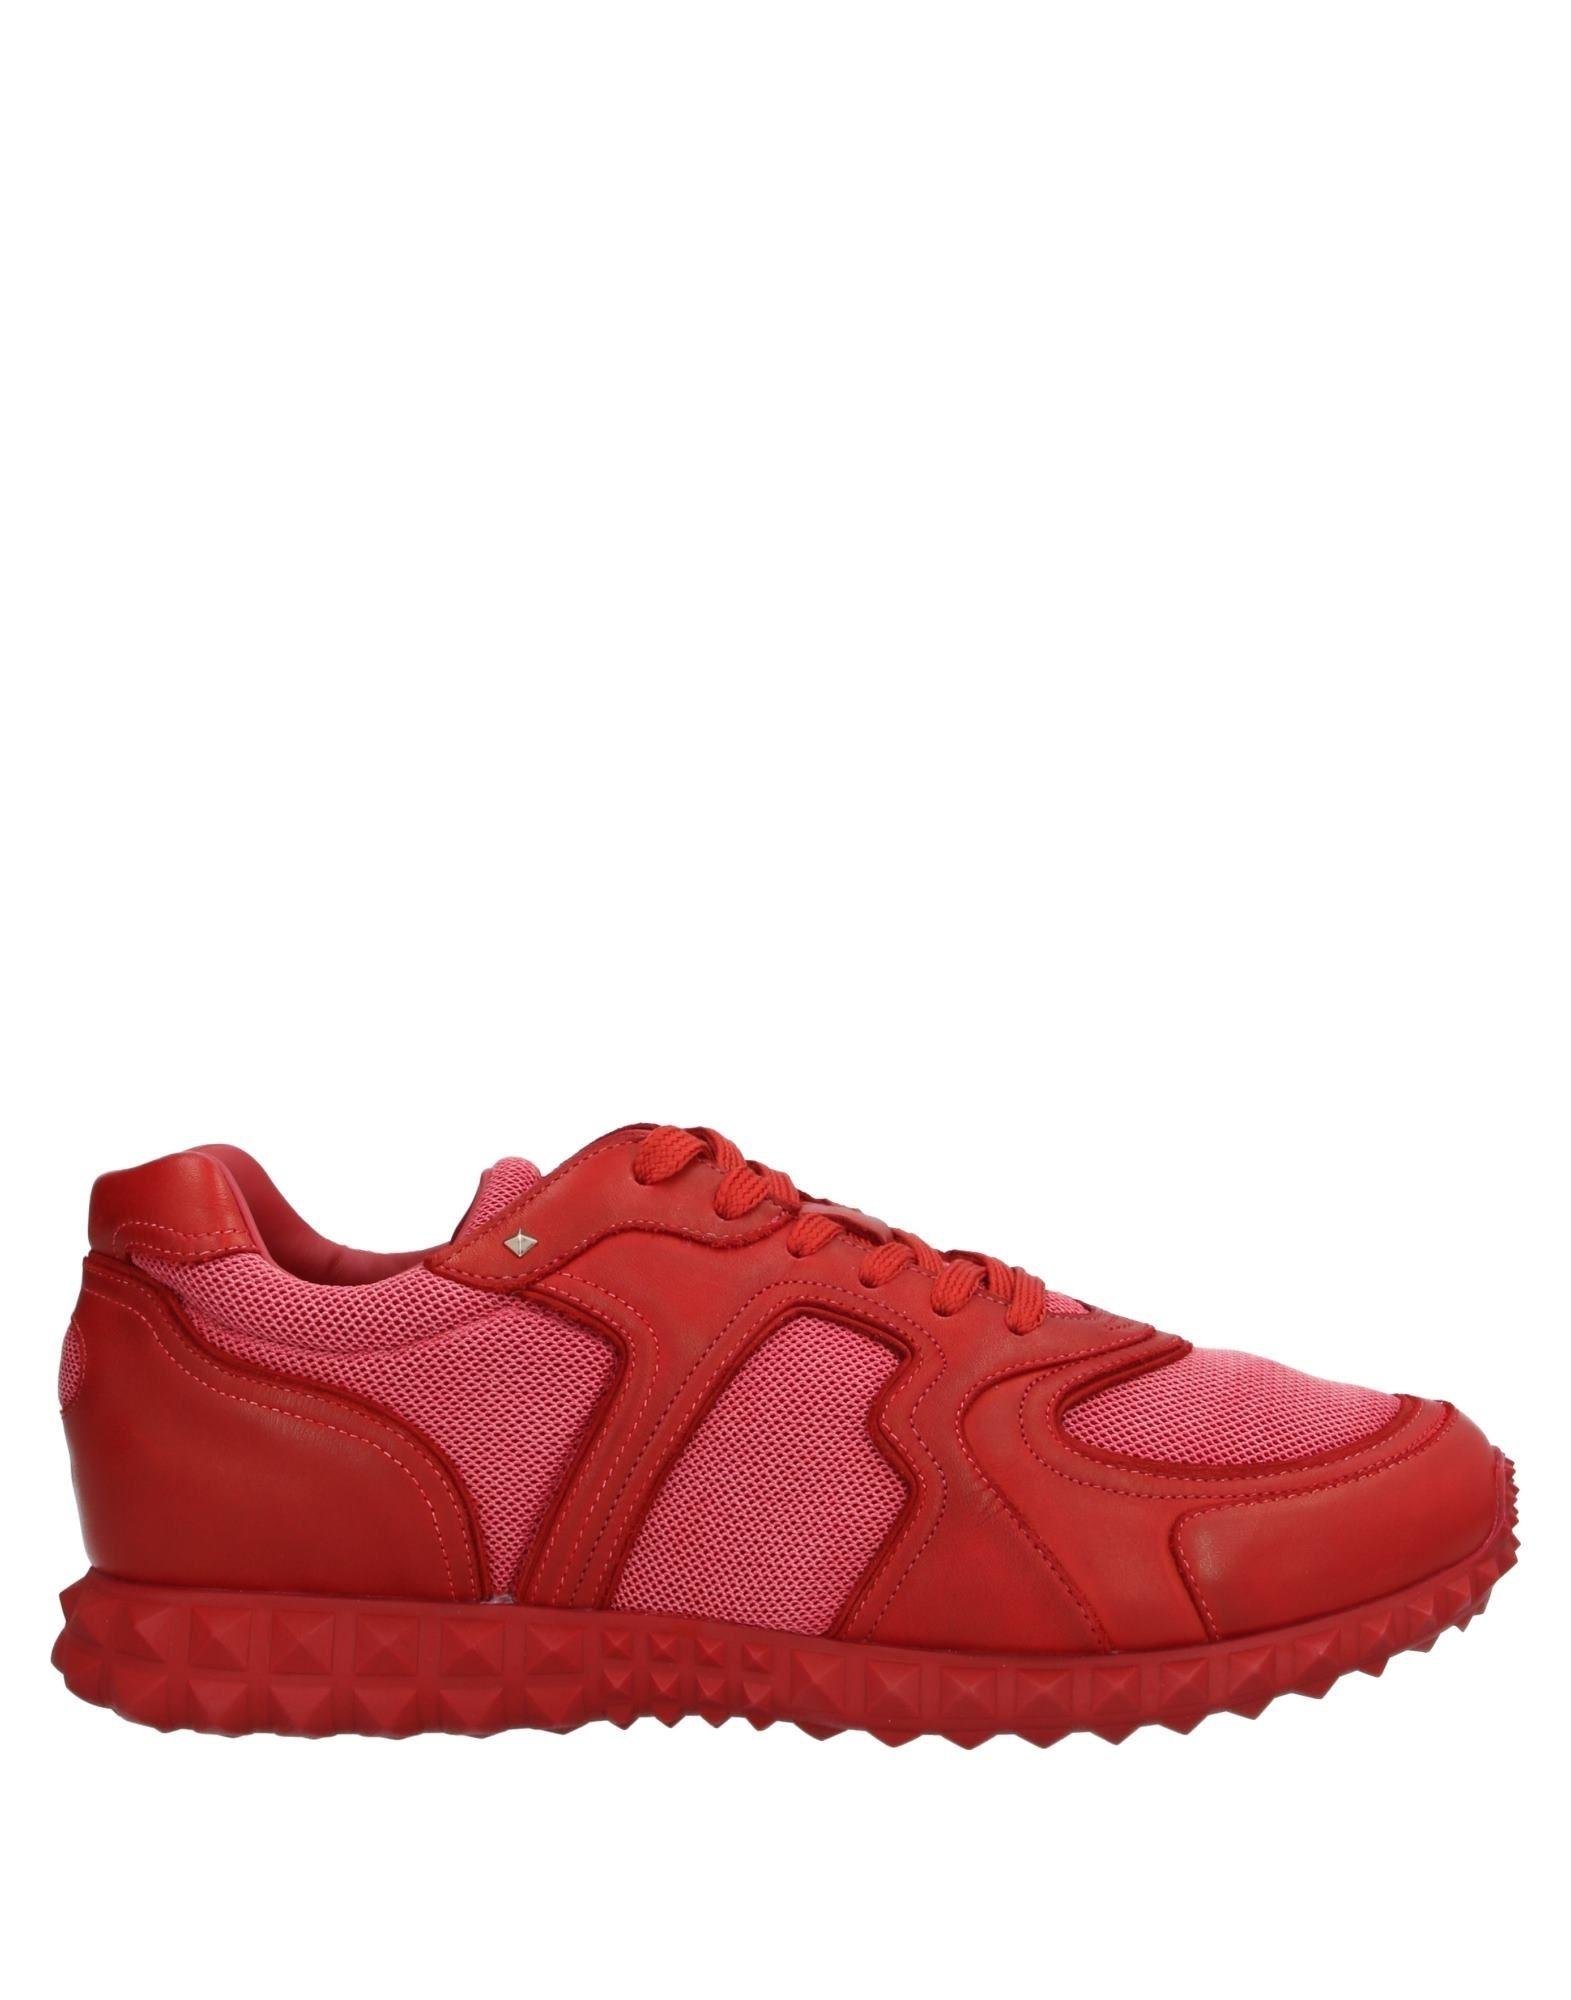 Valentino Garavani Leather Low-tops & Sneakers in Red for Men - Lyst